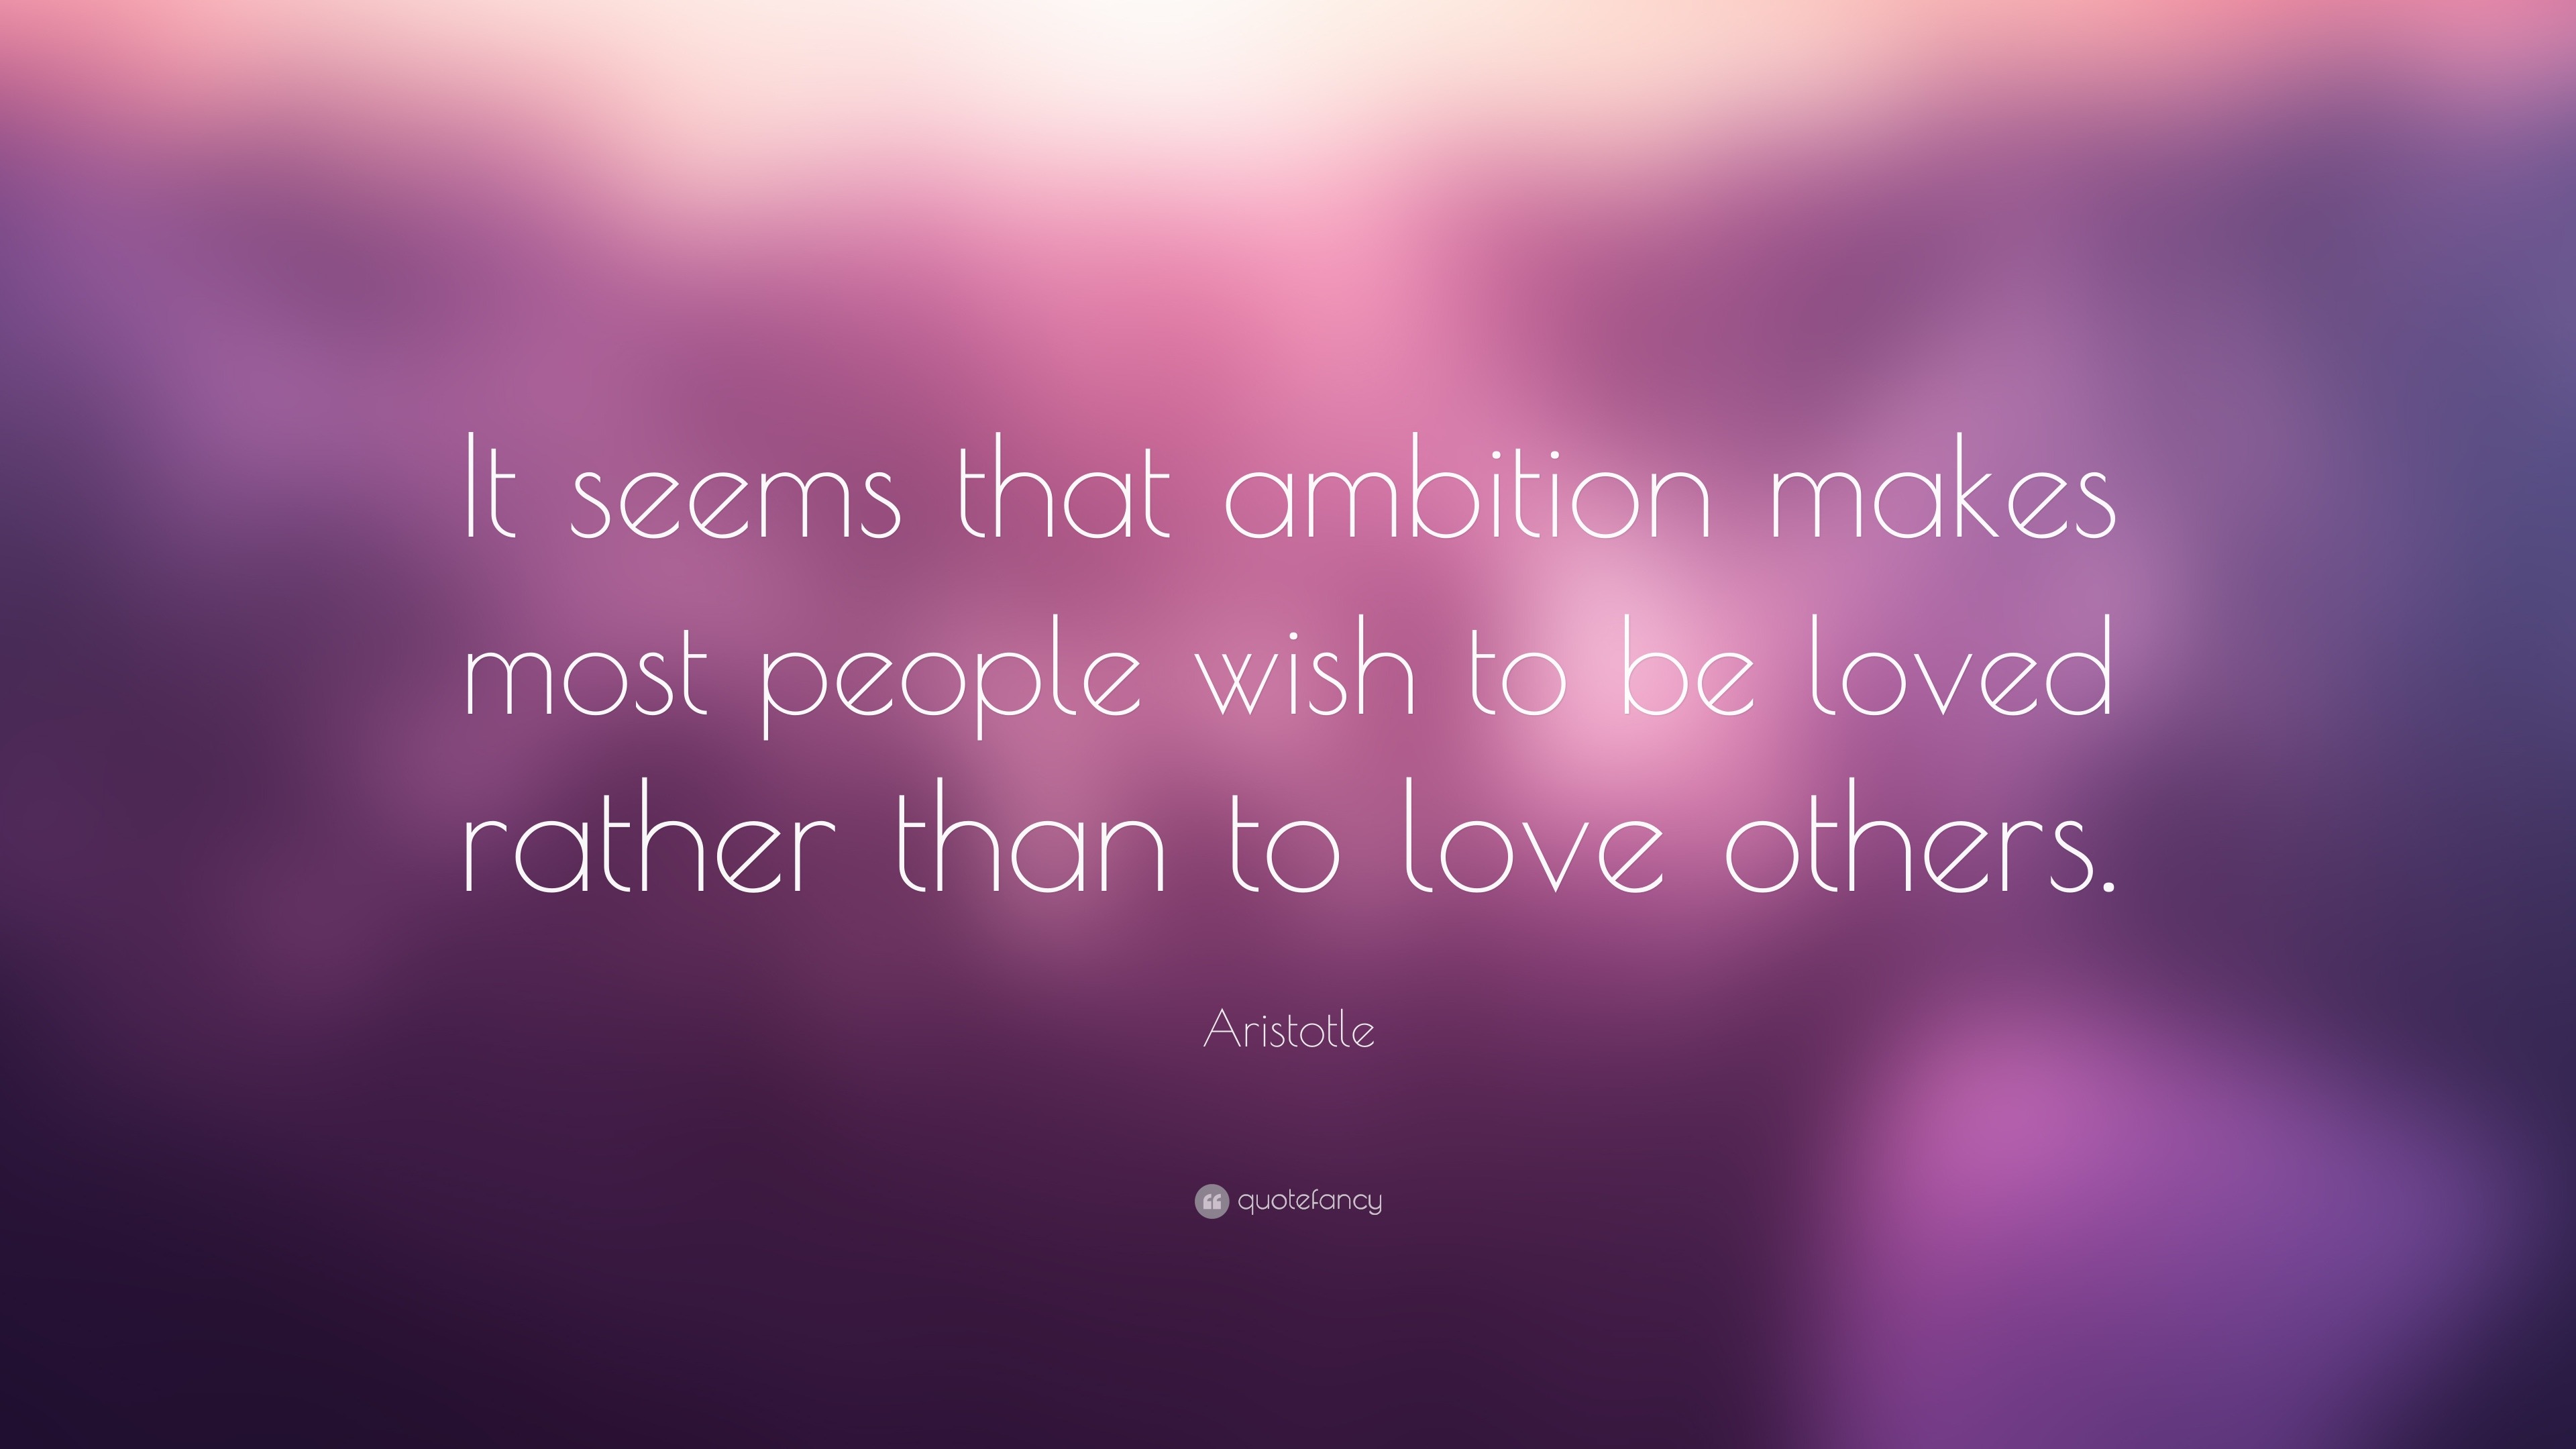 Aristotle Quote: “It seems that ambition makes most people wish to be ...